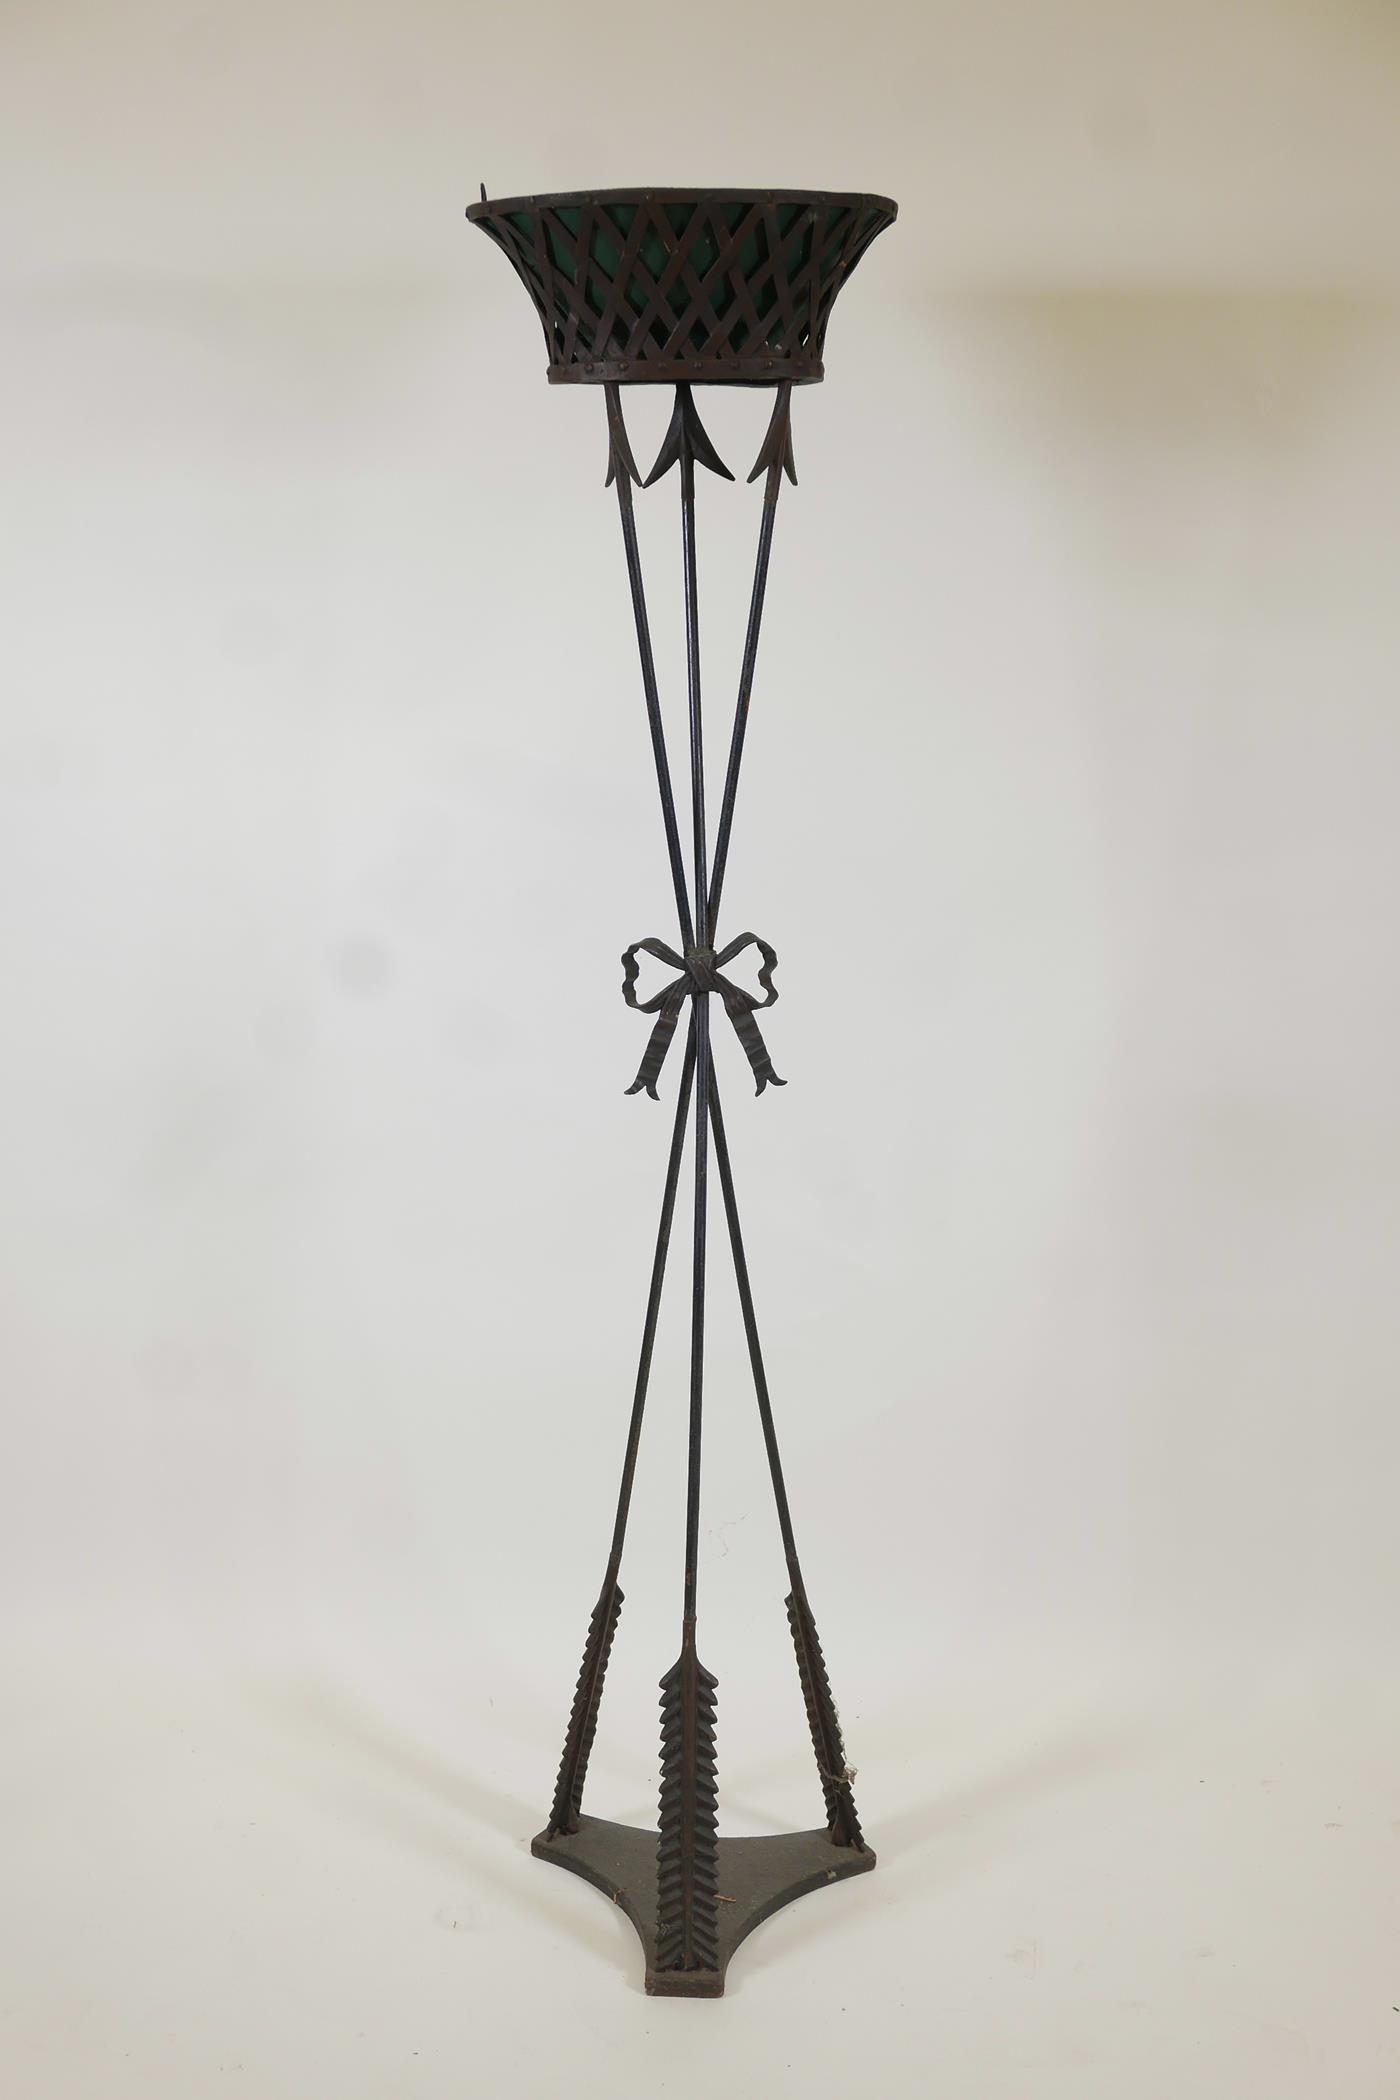 A wrought metal torchere with painted toleware liner, 58" high